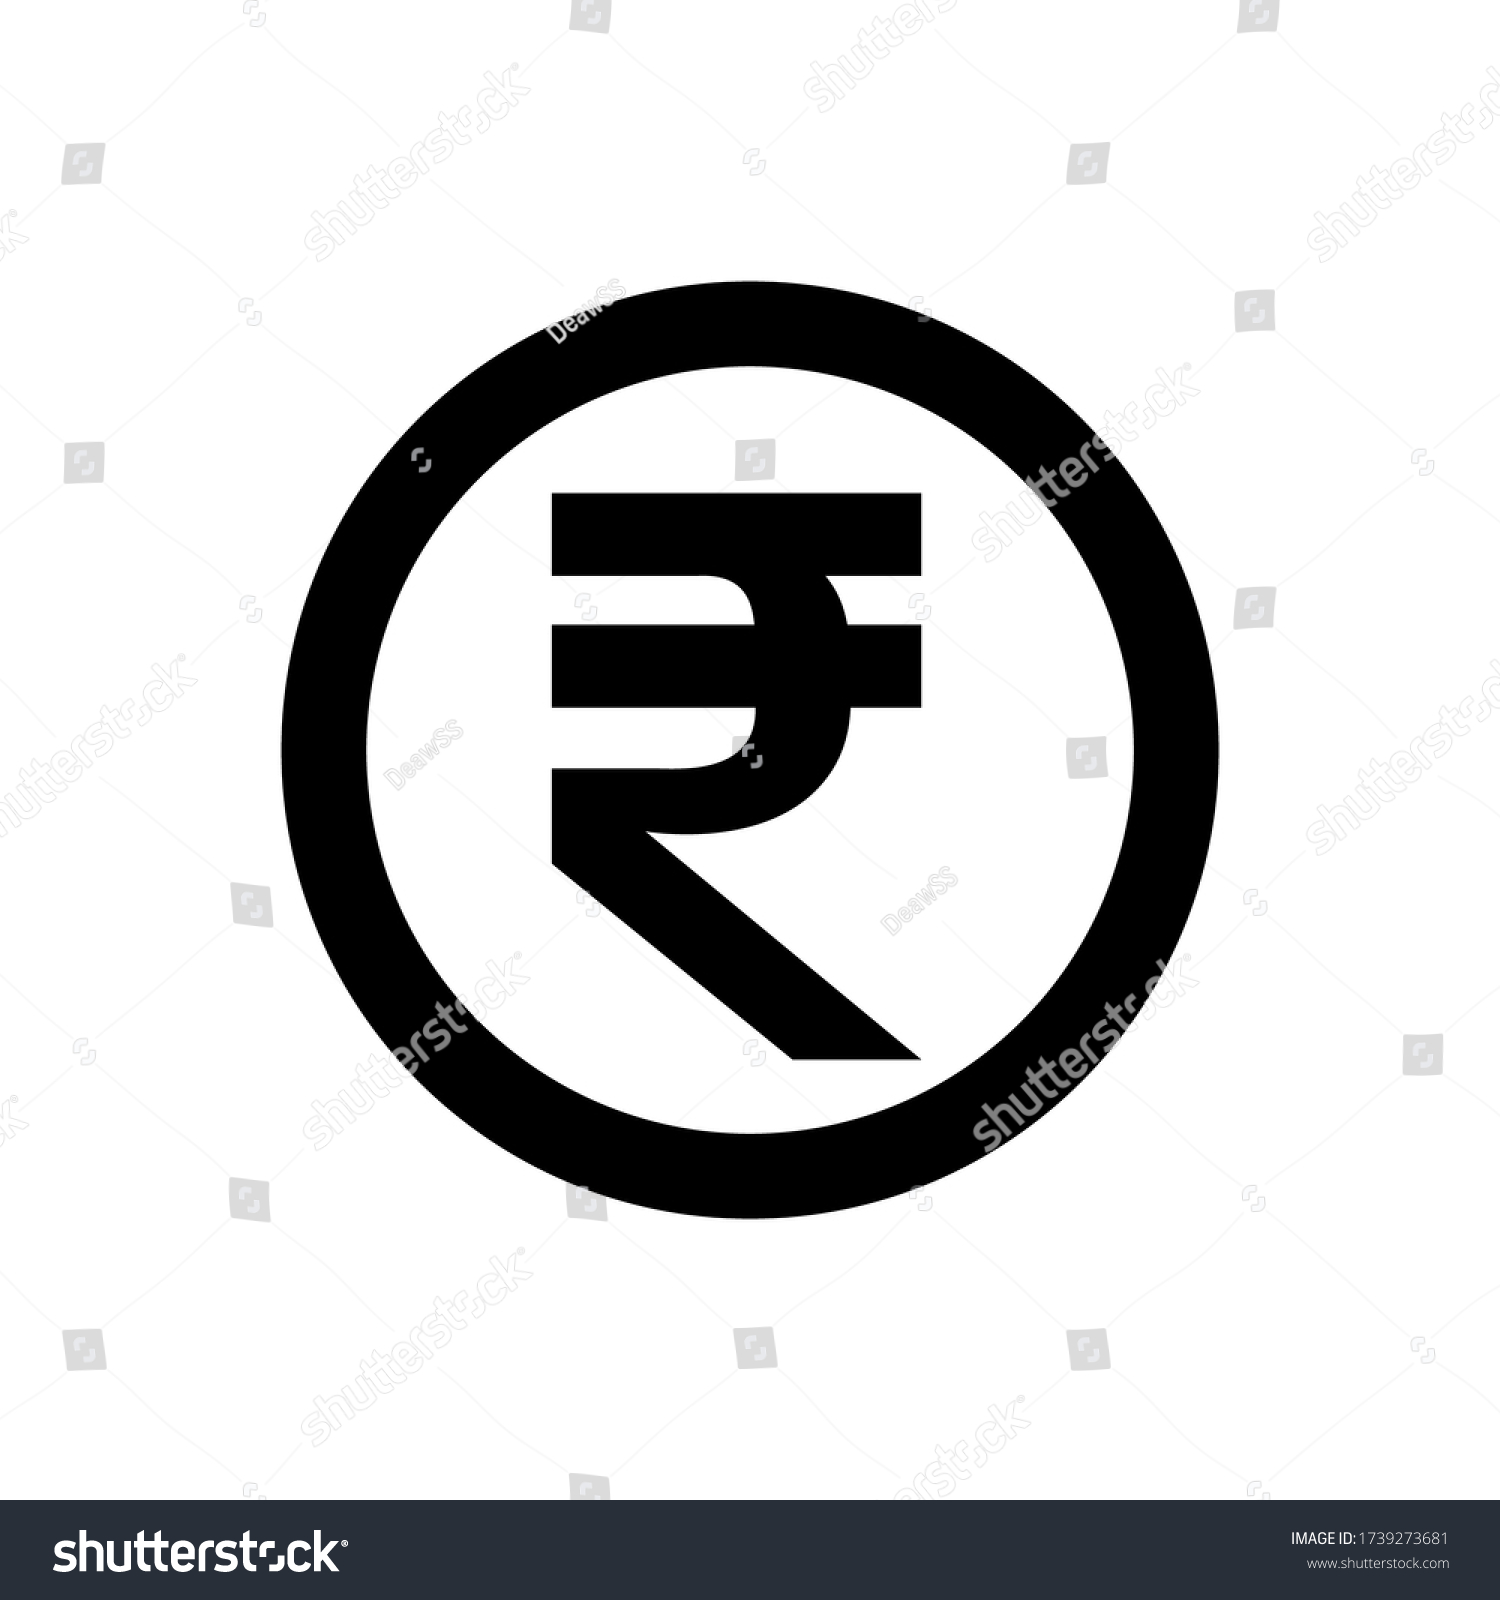 SVG of rupee currency coin black for icon isolated on white, rupee money for app symbol, simple flat rupee money, currency digital rupee coin for financial concept, vector svg